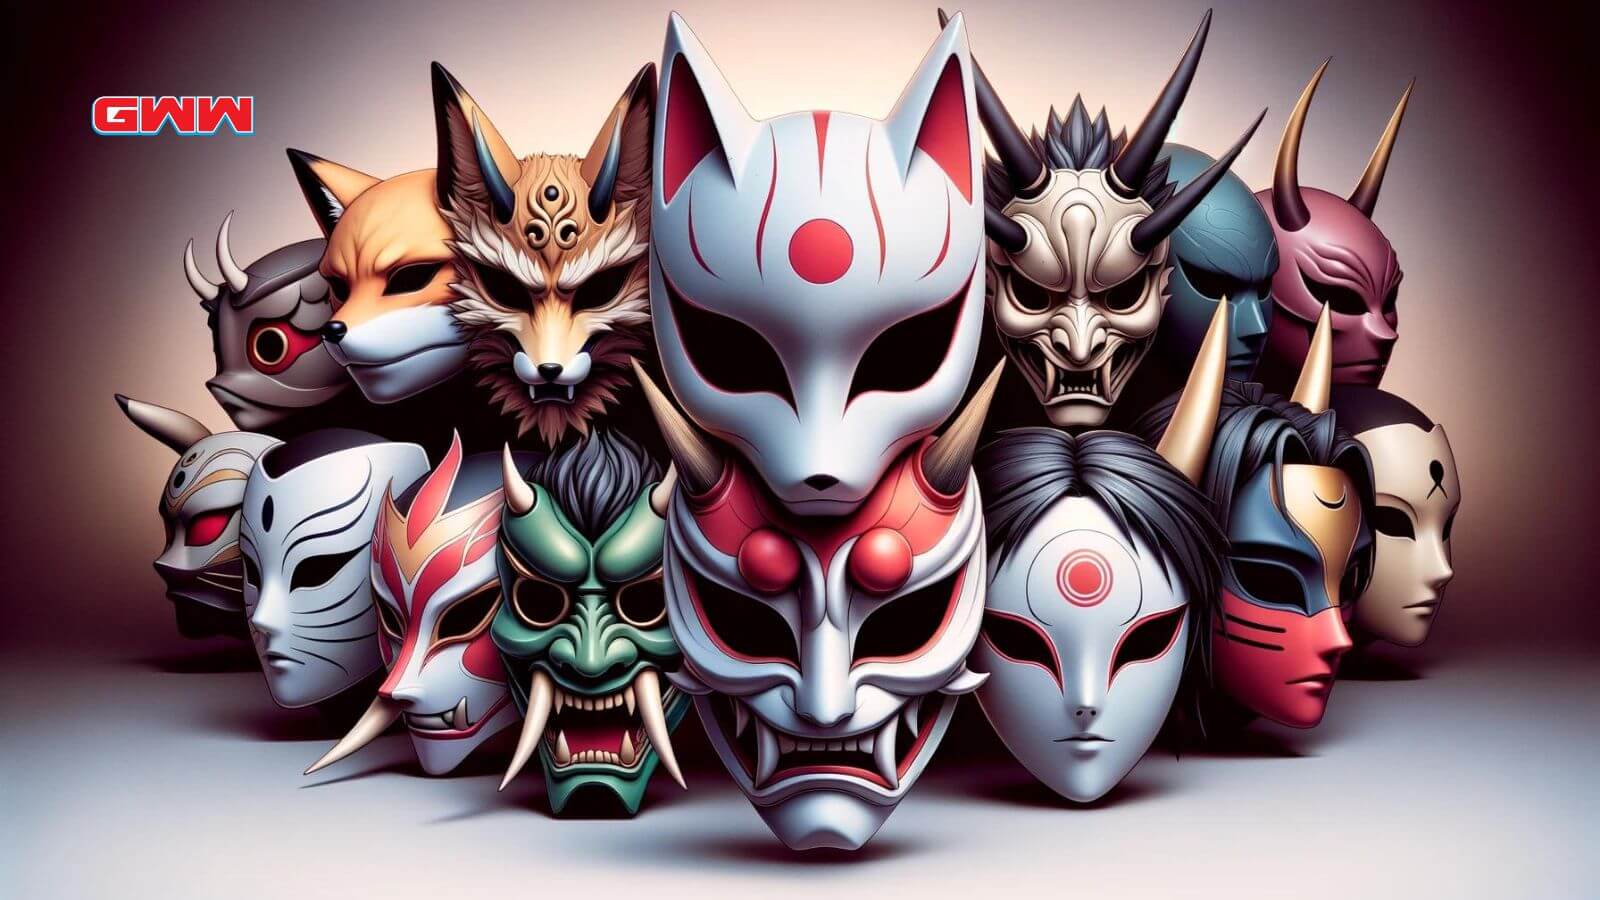 An array of various iconic anime masks displayed prominently.